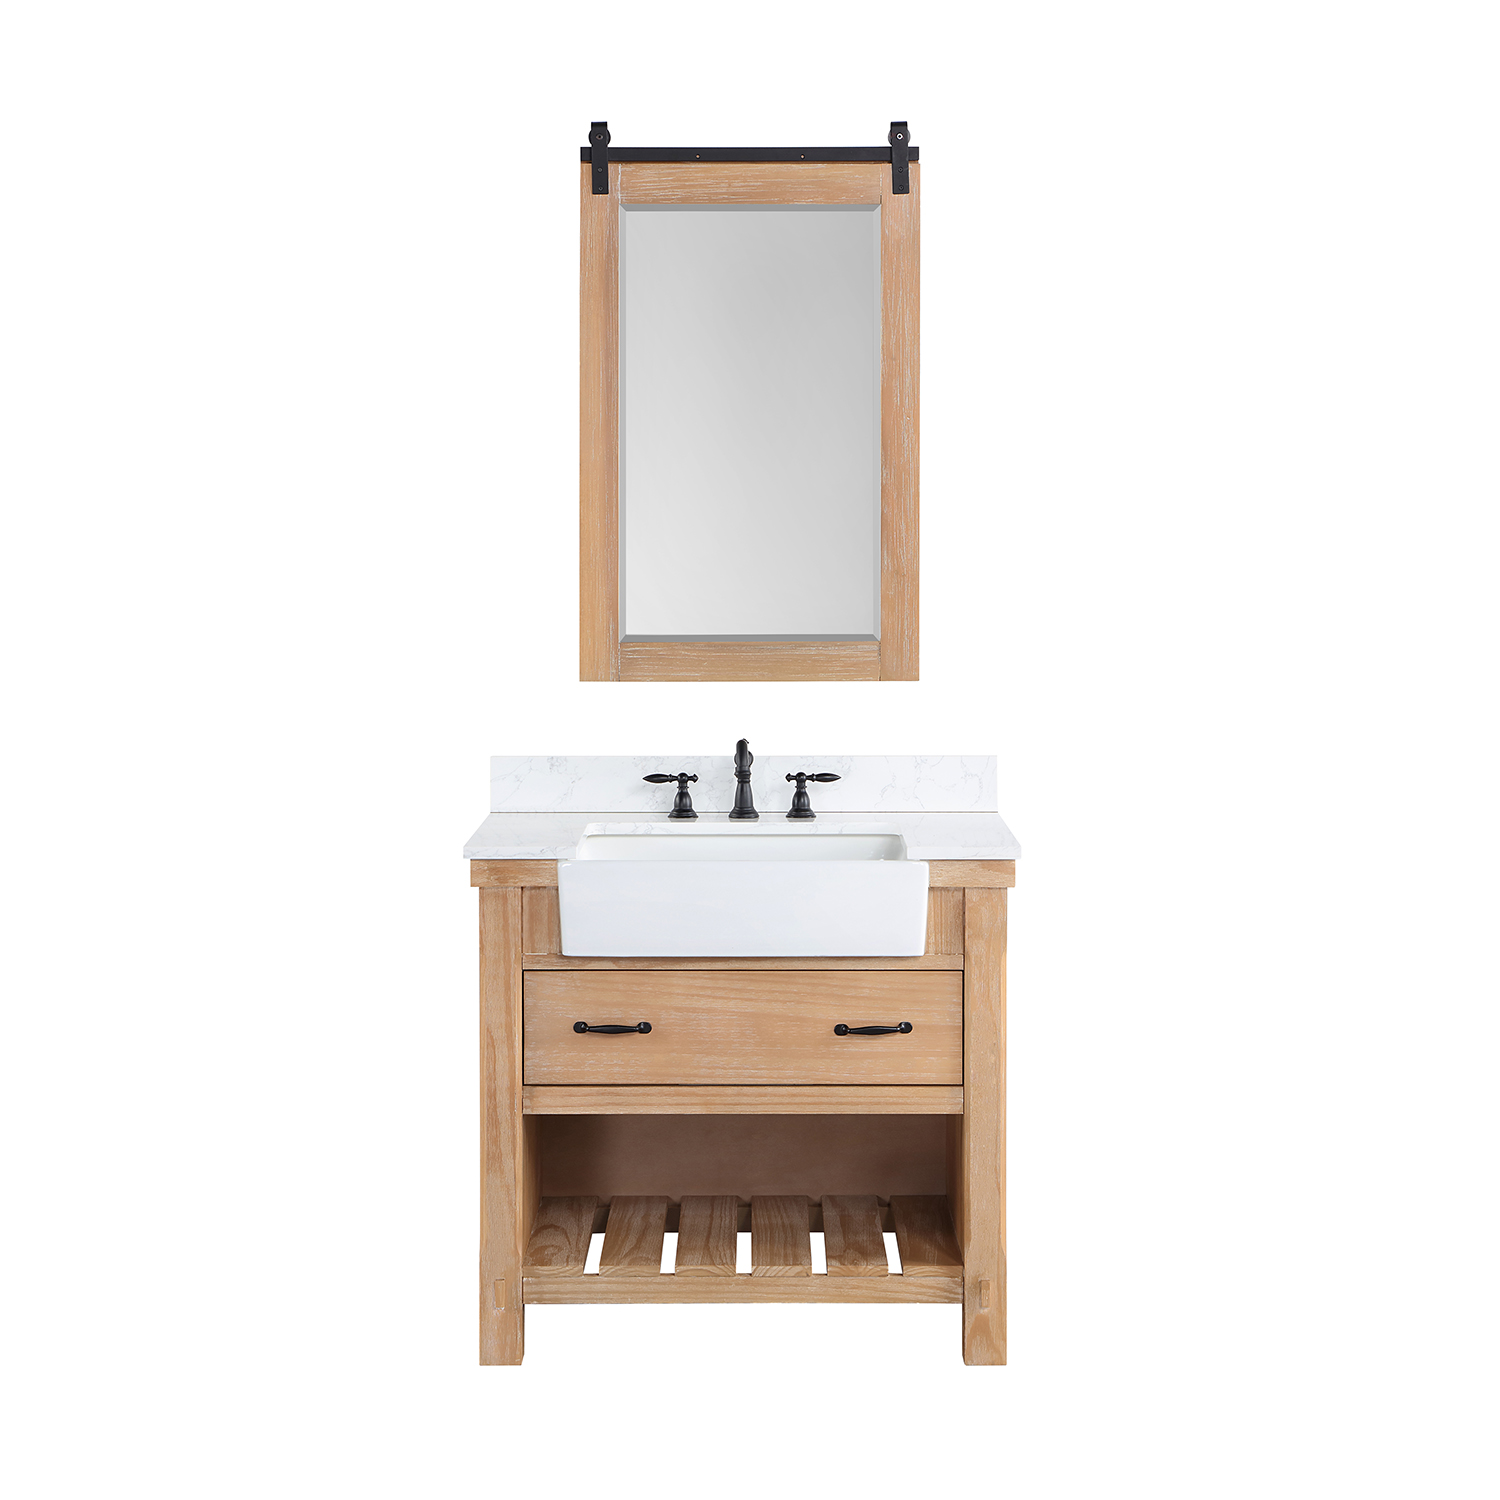 36" Single Bath Vanity in Weathered Pine with Composite Stone Top in White, White Farmhouse Basin